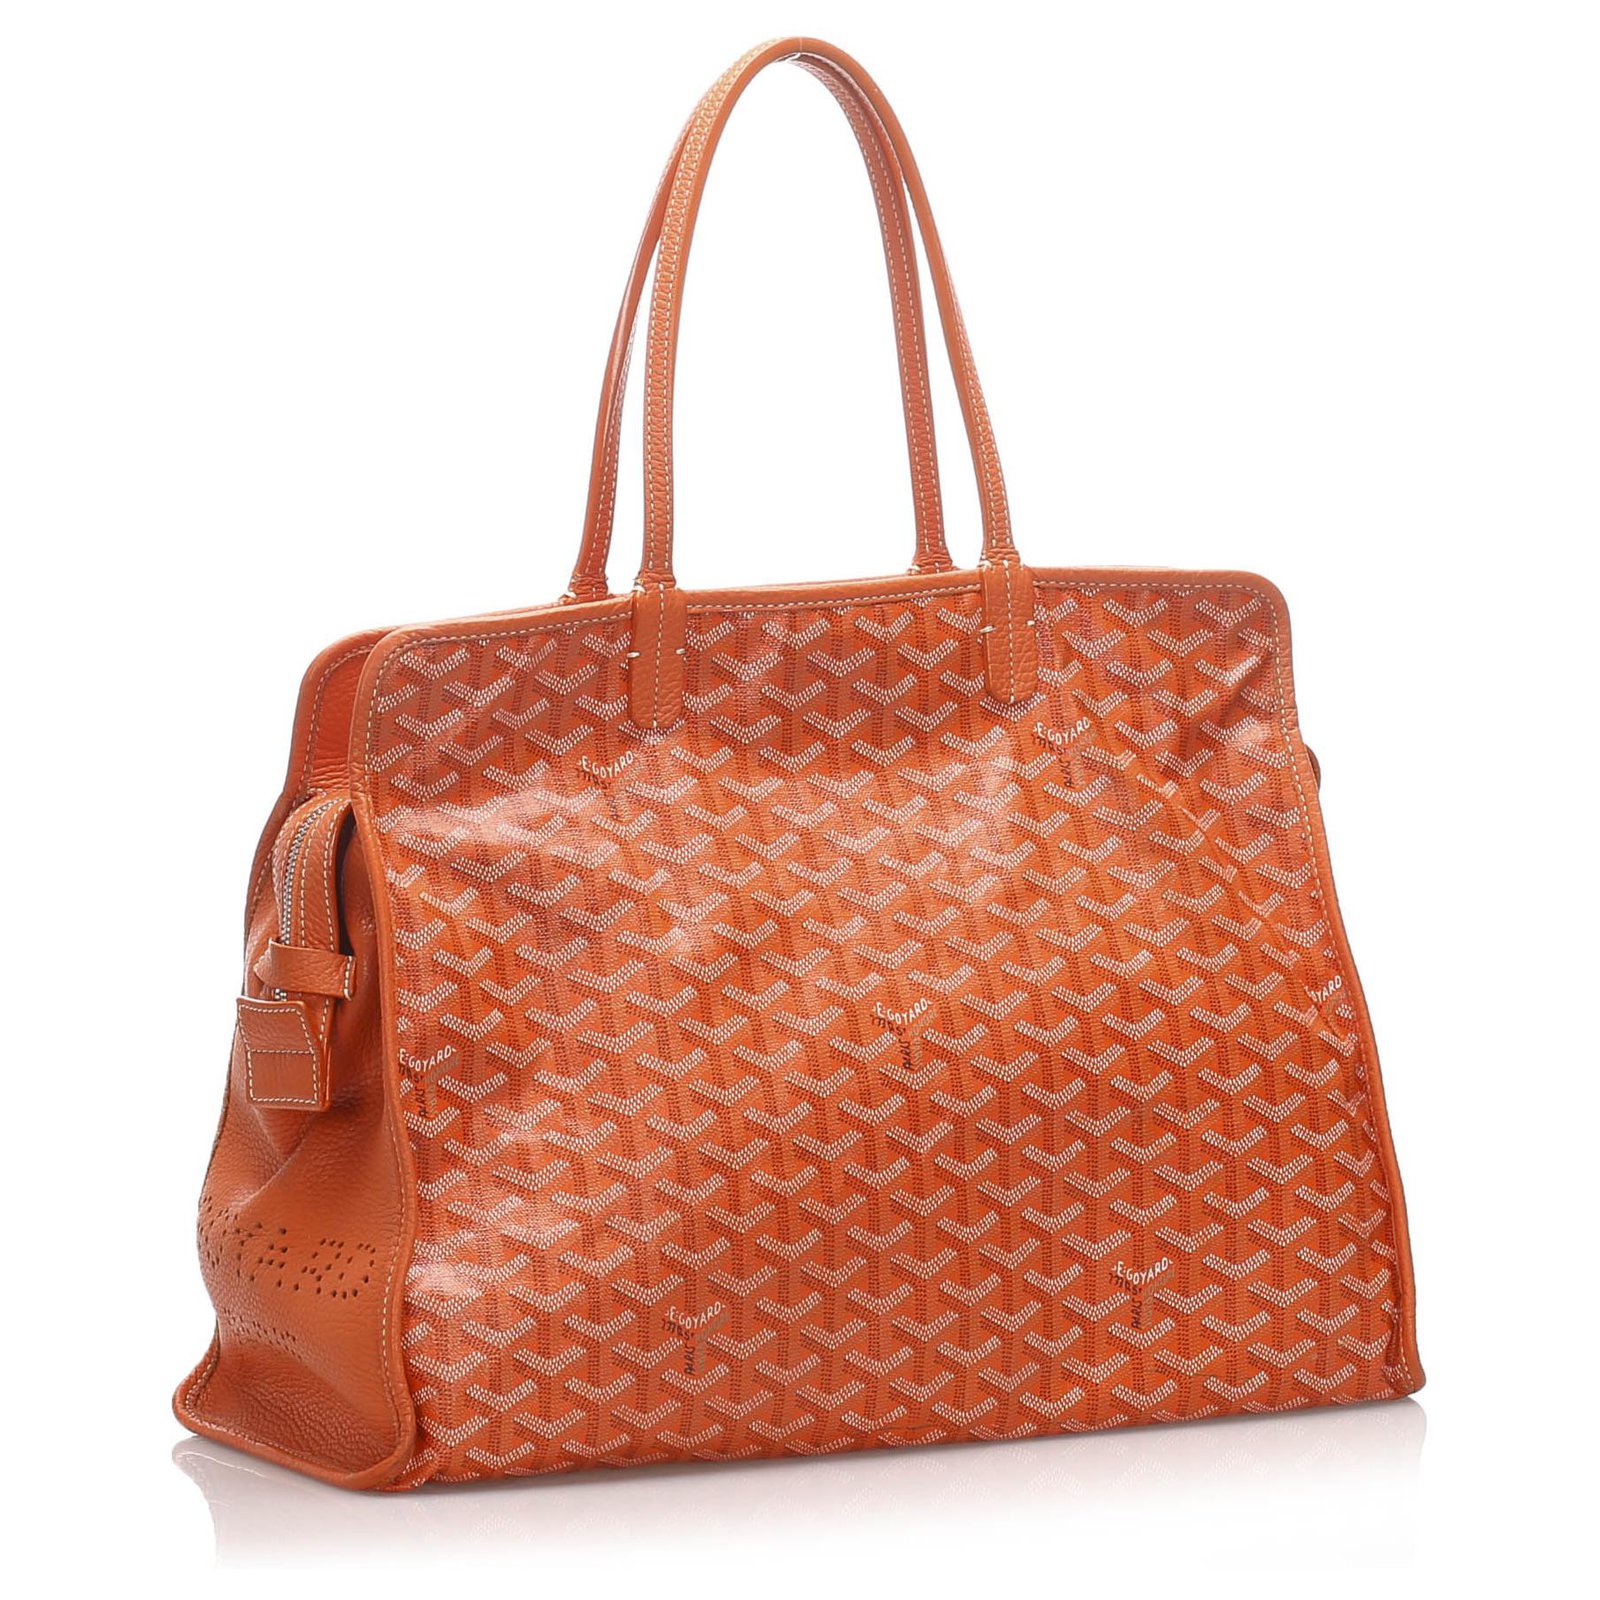 Hardy leather tote